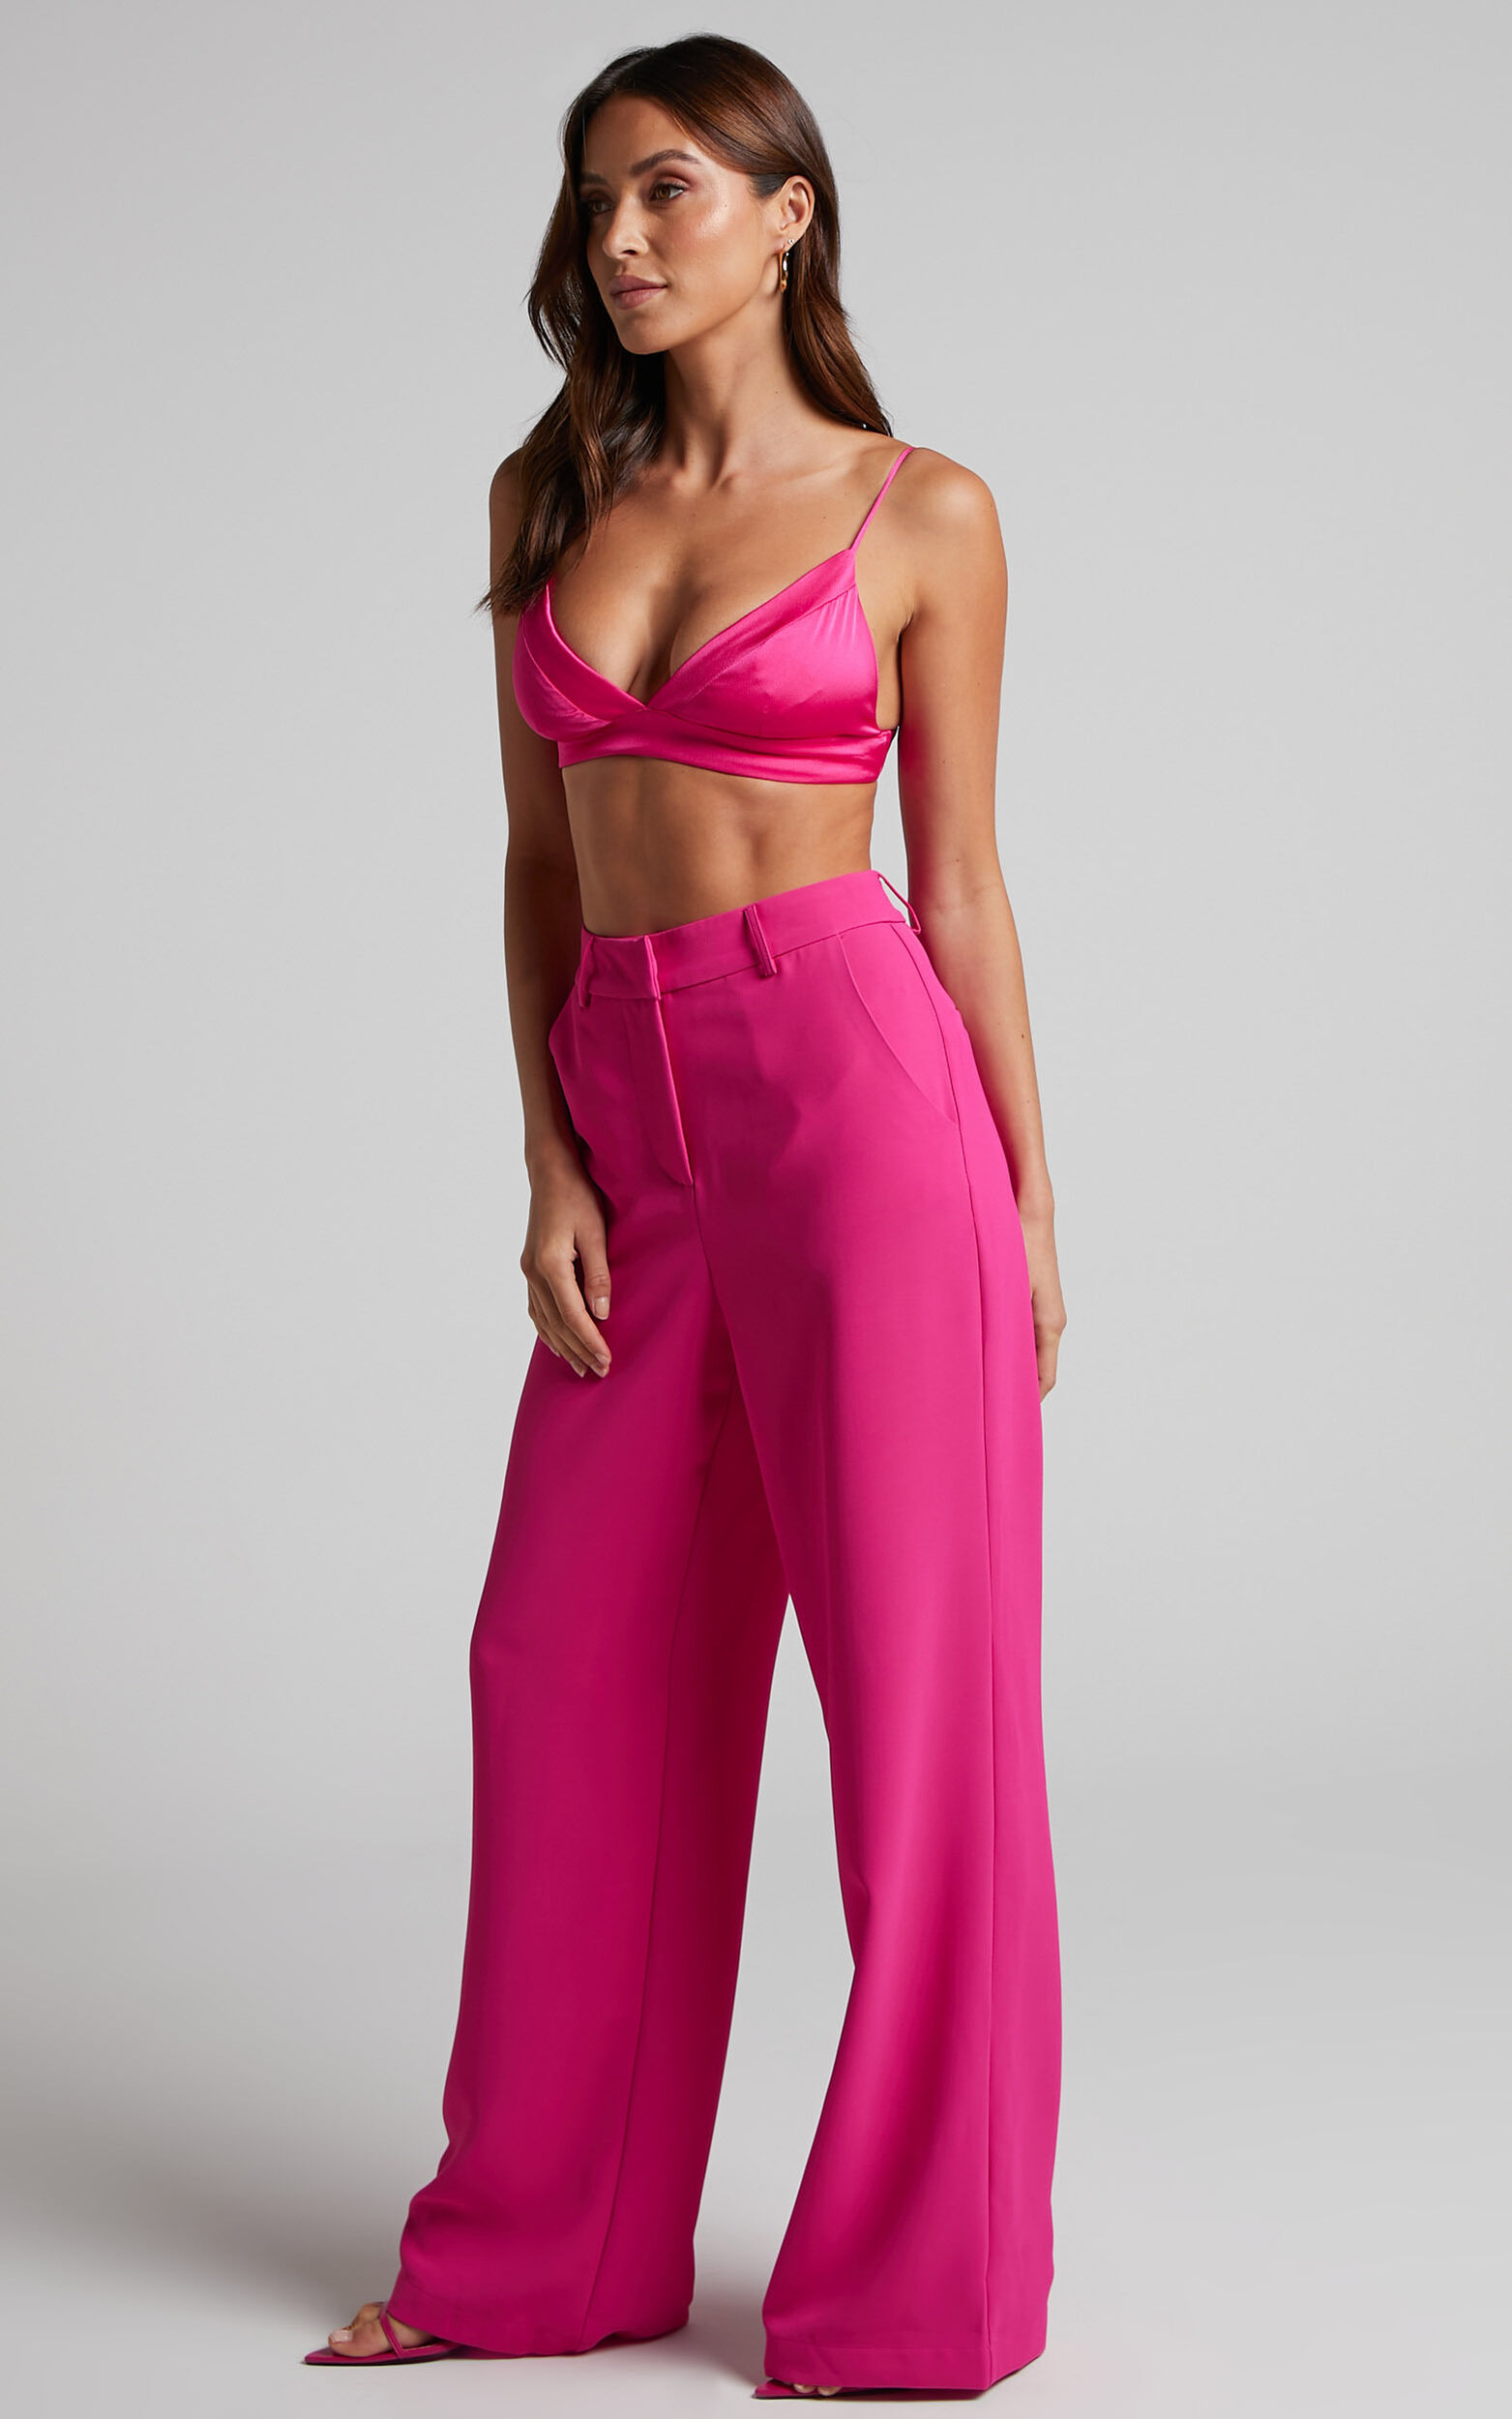 Stealing The Show High Waist Trousers In Hot Pink • Impressions Online  Boutique